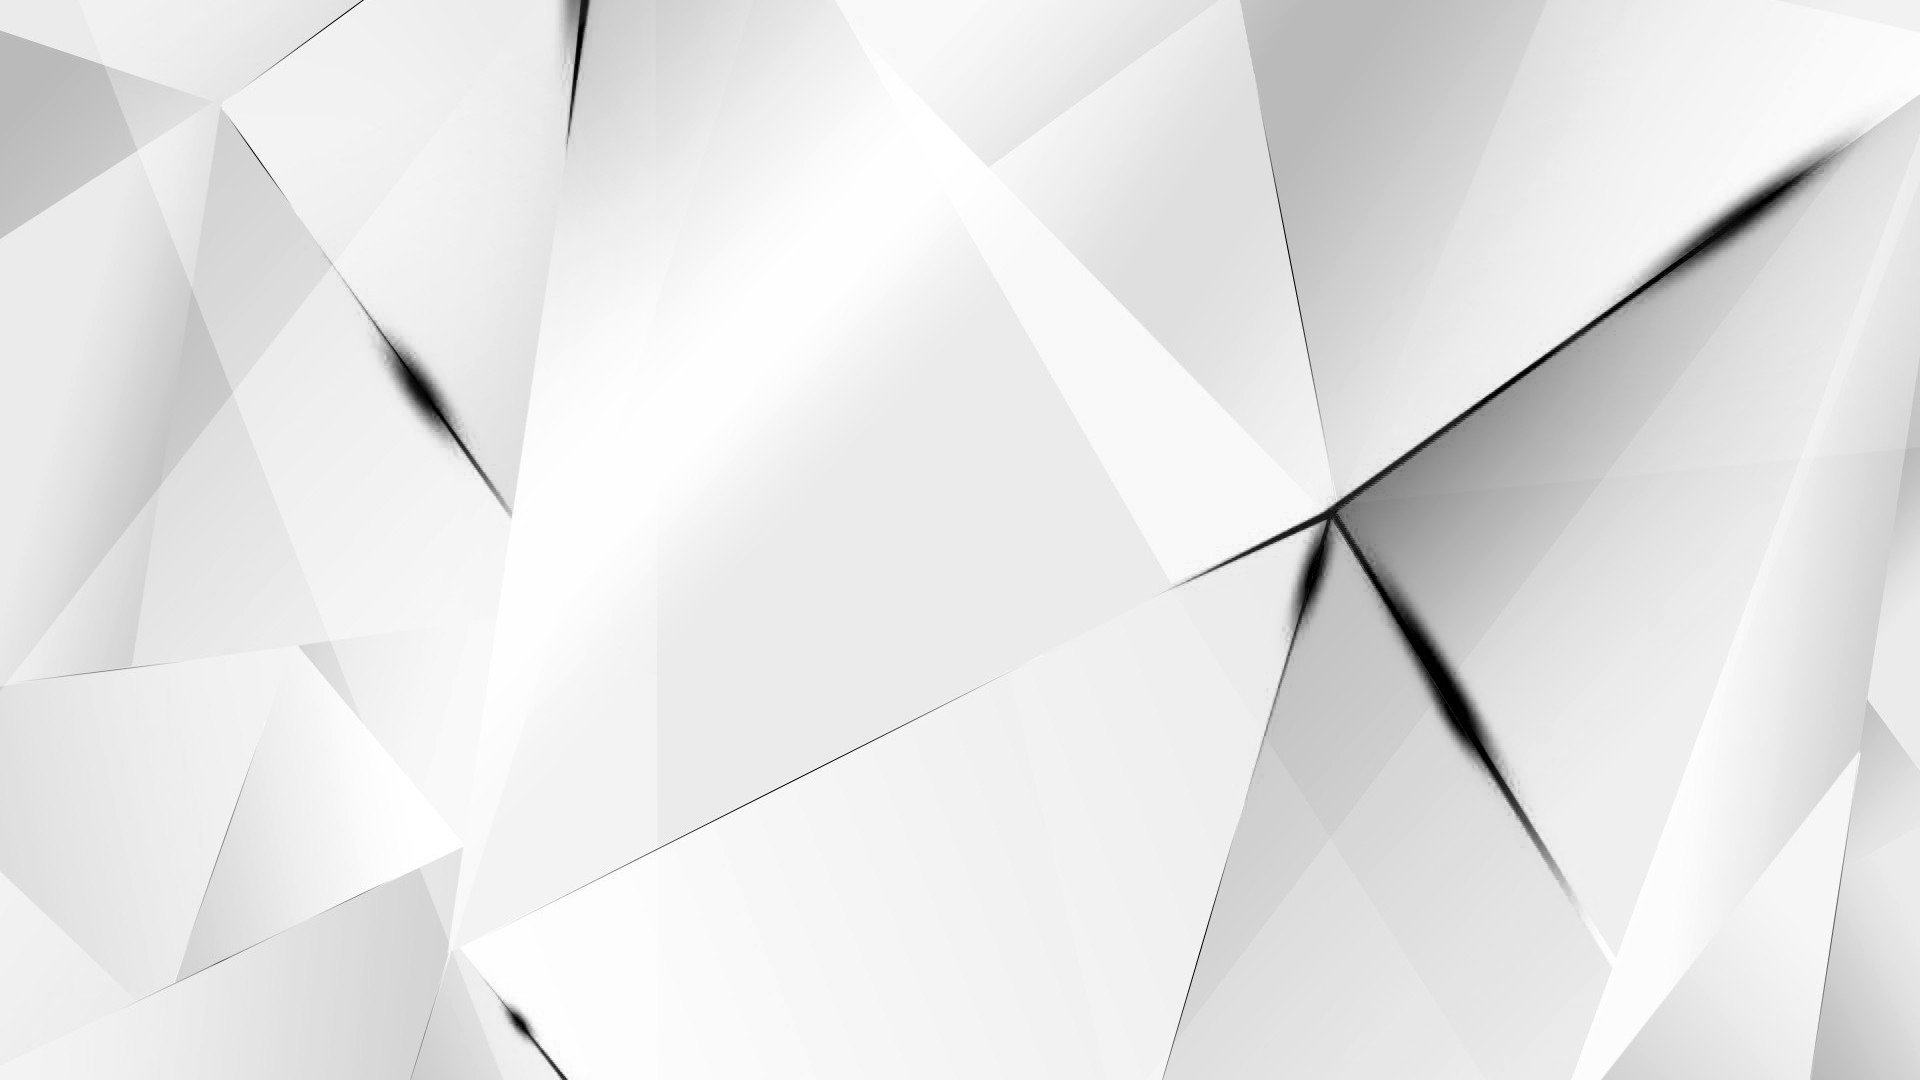 Black and White Abstract Wallpapers - Top Free Black and White Abstract